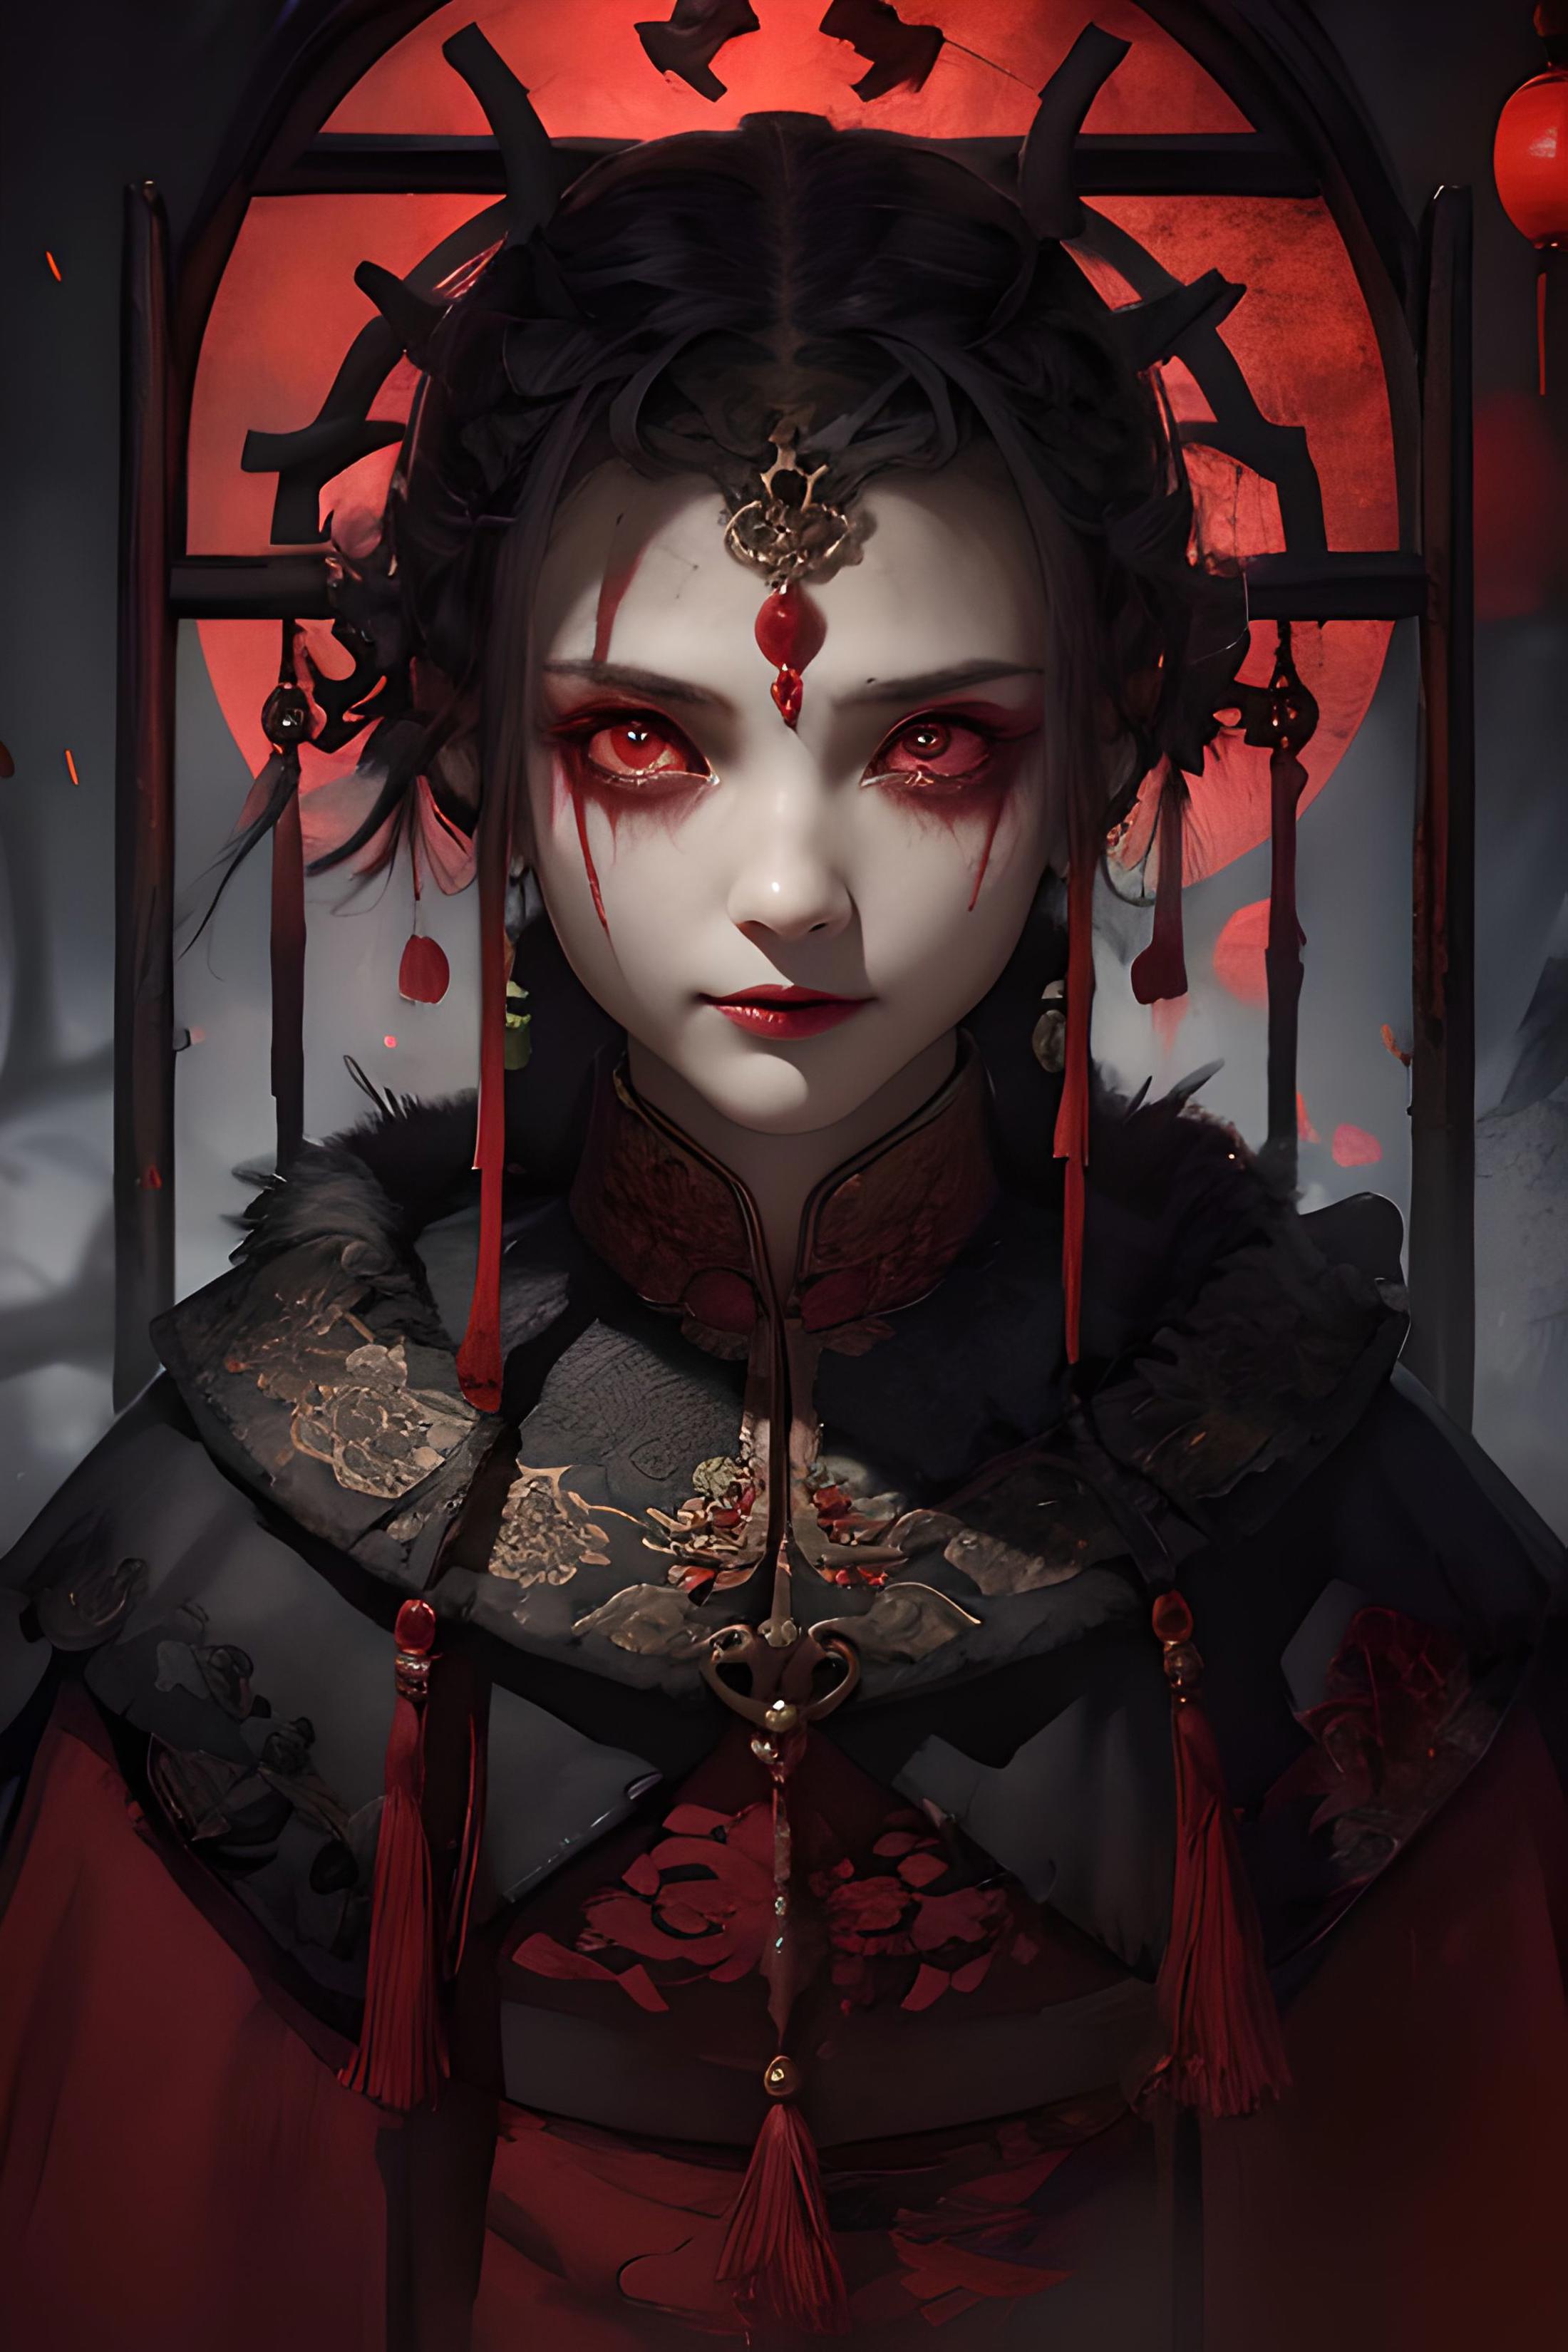 PAseer的中式恐怖/PAseer's Chinese Horror Style image by Aseer